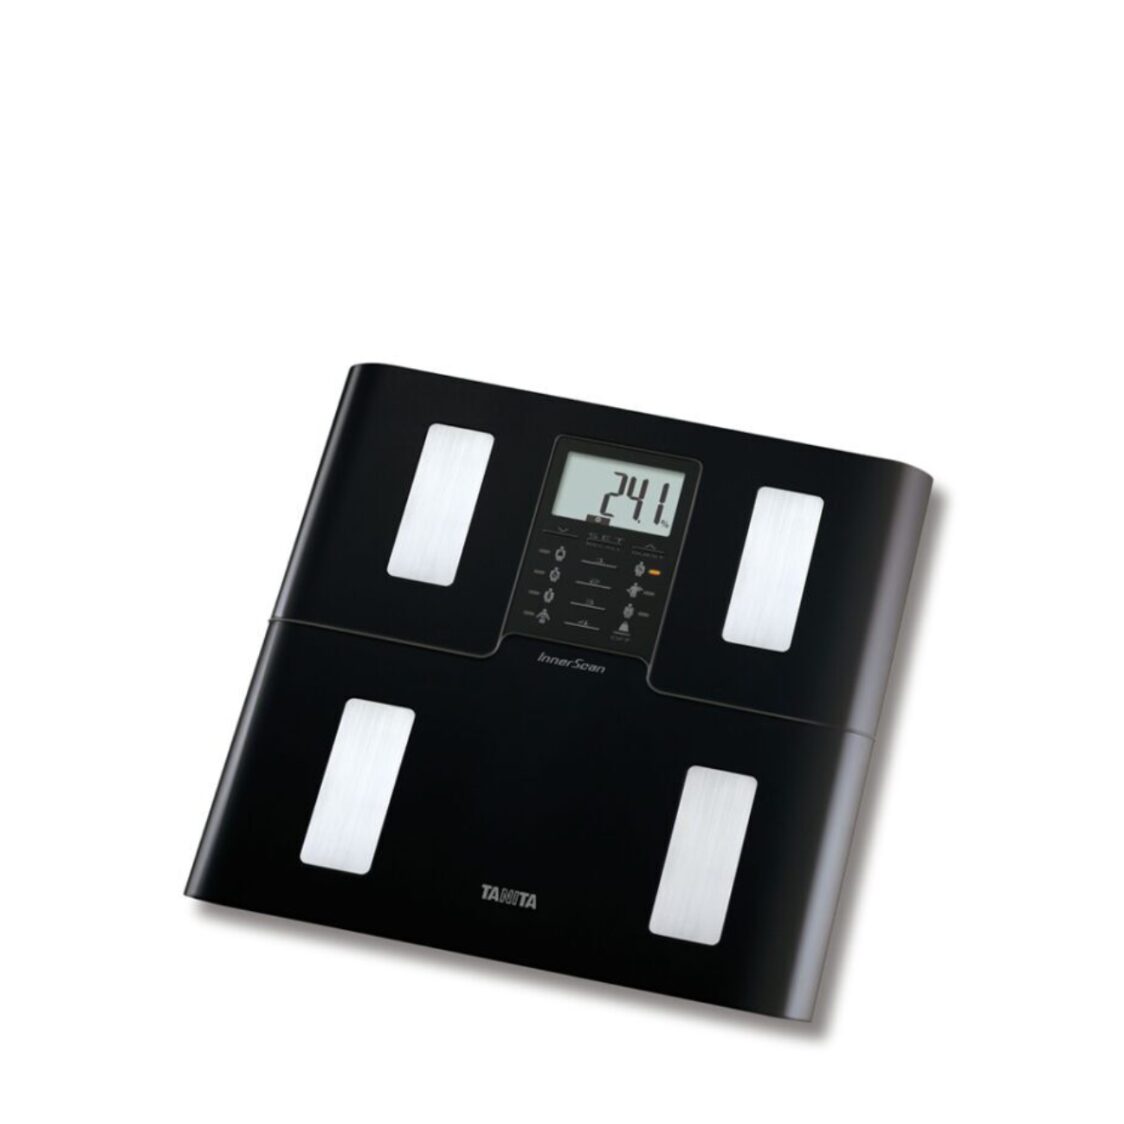 Tanita Body Composition Scale (BC541N) Metro Department Store